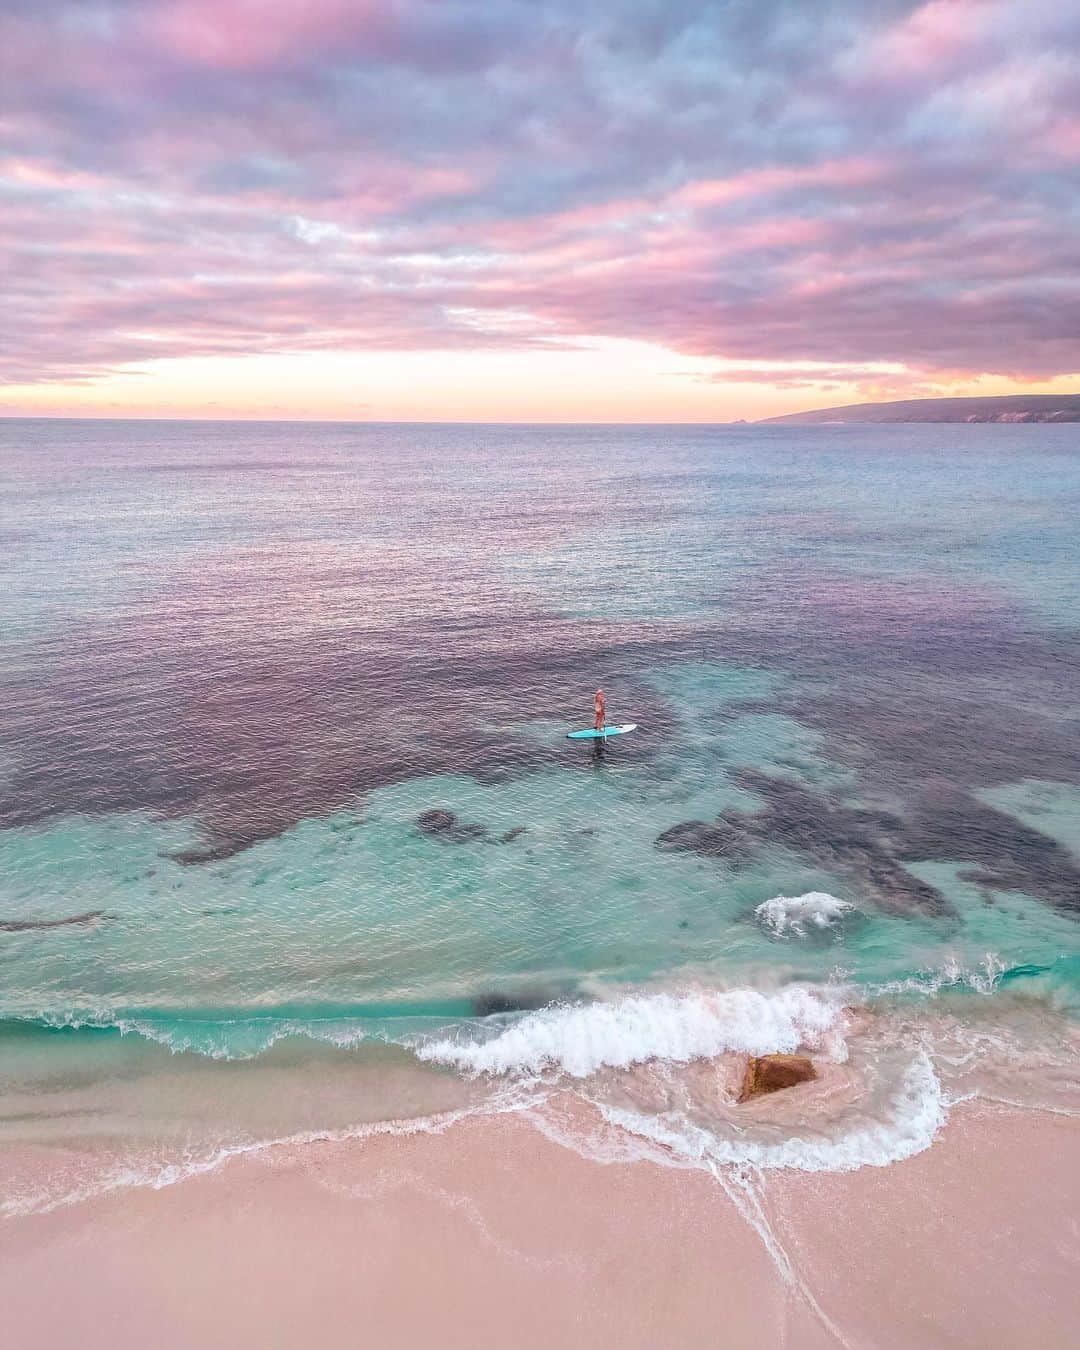 のインスタグラム：「This is what makes @smiths_beach_resort our first choice of places to stay in the region 🌊  ✨ The location is everything! It’s right on the doorstep of the most beautiful beach that has epic surfing, magical sunsets, beautiful marine life and if you’re up for an adventure then hop on your paddle board. I’ve never quite felt the power and wildness of the ocean the same way as I do here. Everything feels so electric and alive especially during a full moon 🌕⚡️swipe for more pics 🌙   ✨ the resort is environmentally conscious utilizing the power of the sun ☀️ with 270 solar panels (an area that is approx 2 tennis courts). This is part of a continued effort to minimize their carbon footprint, increase water conservation, and protect the surrounding nature and wildlife 🙏  ✨ I love the incredible villas! The open layout, the views, the quiet peacefulness of this place. All the rooms are self contained and have all the amenities you need. They have the most comfortable beds and I’m always ensured a good nights sleep at Smiths. You can choose from budget friendly beach shacks to luxurious beachfront villas.   ✨ They have a restaurant and a gourmet deli and wine store. And I can vouch for the high quality selection of wines and food on offer here. Absolutely superb and they can cater for plant based and allergies.   There are so many more things I love about this place. Some I just can’t find the words for. It’s a feeling. And you’ll know once you visit this spectacular part of WA.   📸 @bobbybense   #smithsbeachresort #wathedreamstate #seeaustralia #Margaretriver #australiassouthwest #comeandsaygday #justanotherdayinwa #wanderoutyonder #travelcommunity #perthblogger #travelblogger #beautifulhotels #beautifuldestinations #standuppaddle #sup #fullmoon」